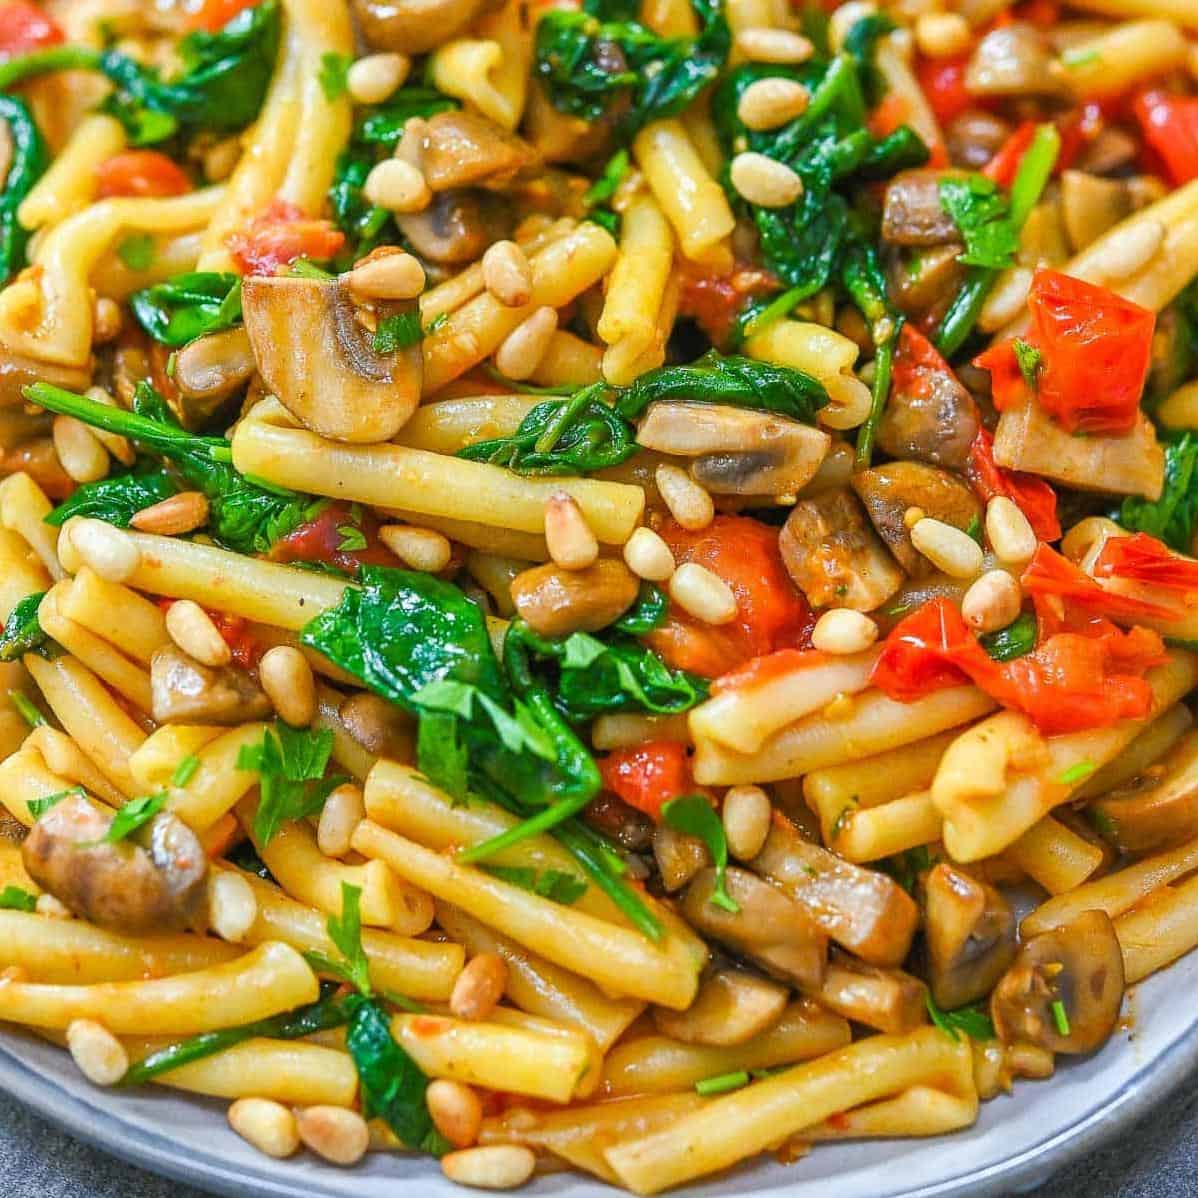  A colorful and flavorful vegan dish that will satisfy your taste buds!